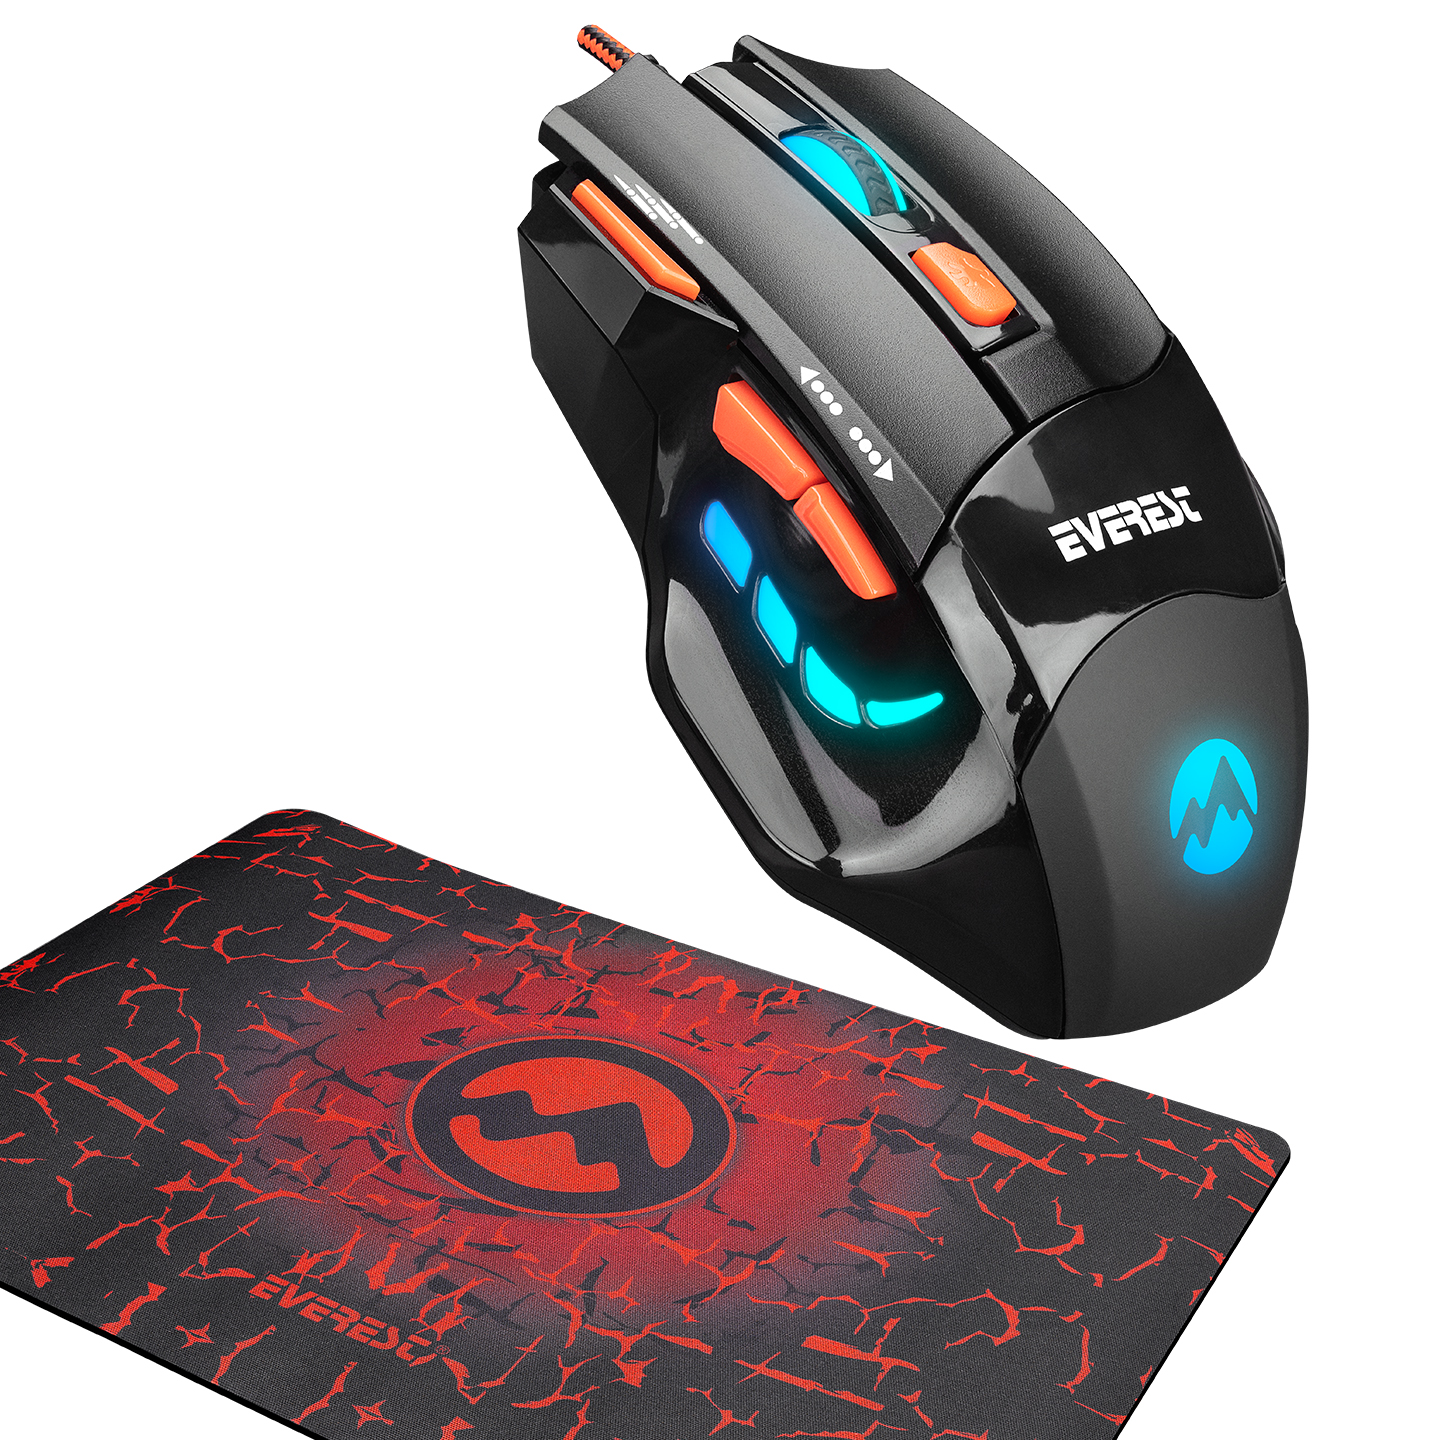 Everest SGM-X7 Usb Black Gaming Mouse Pad and Gaming Mouse